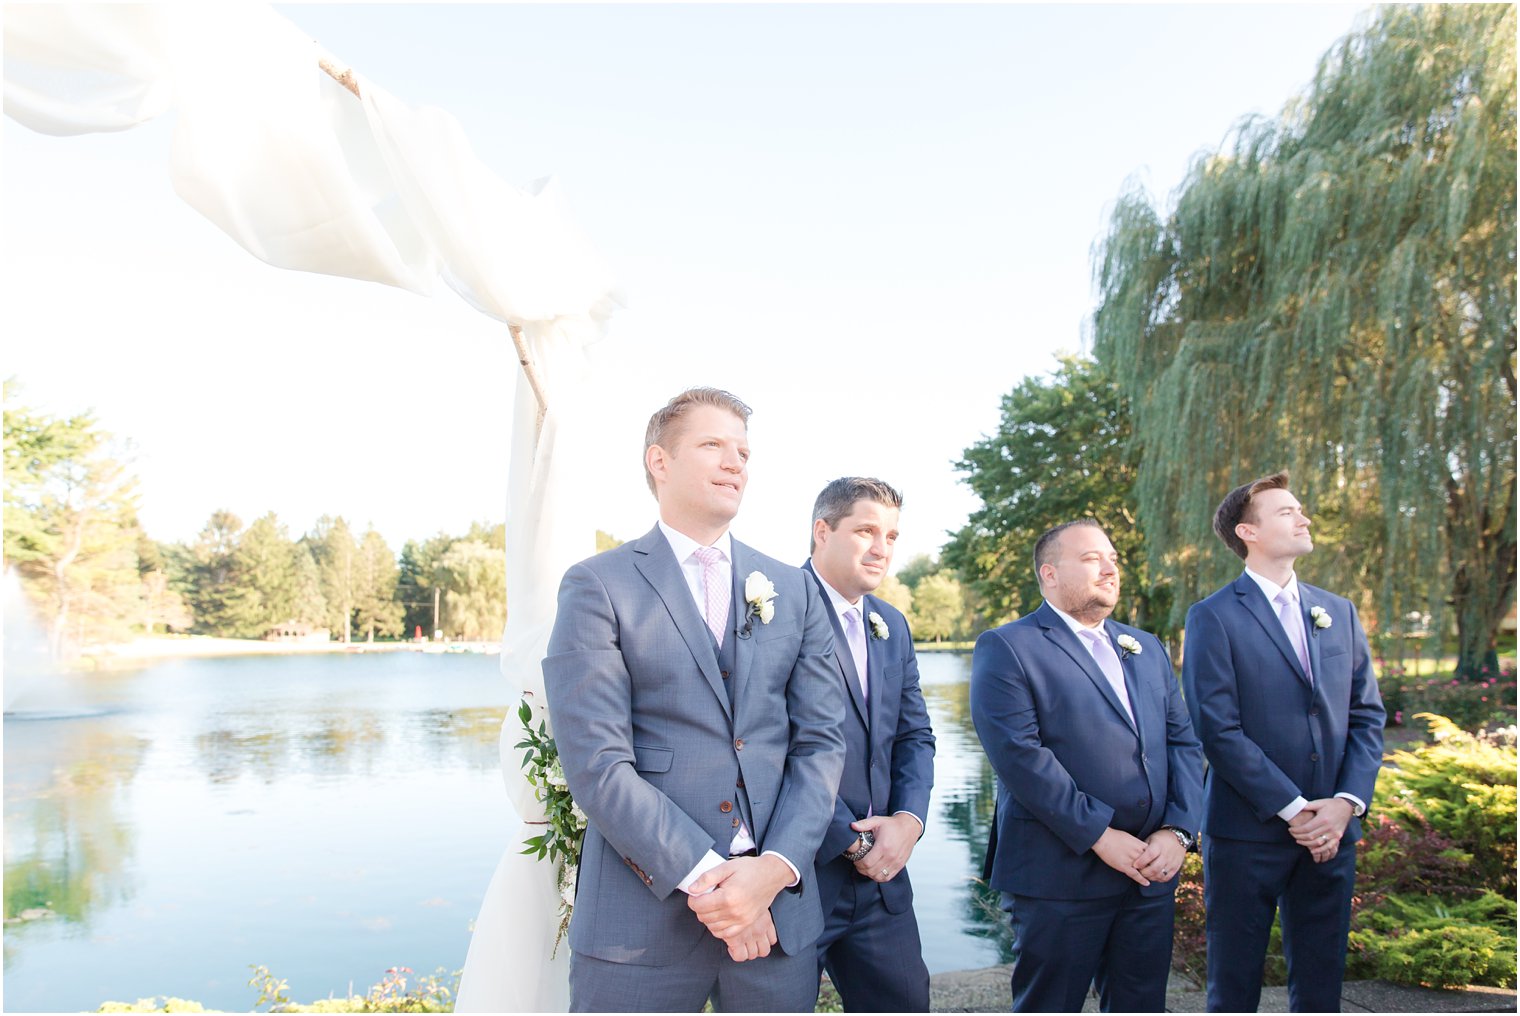 Windows on the Water at Frogbridge outdoor wedding ceremony